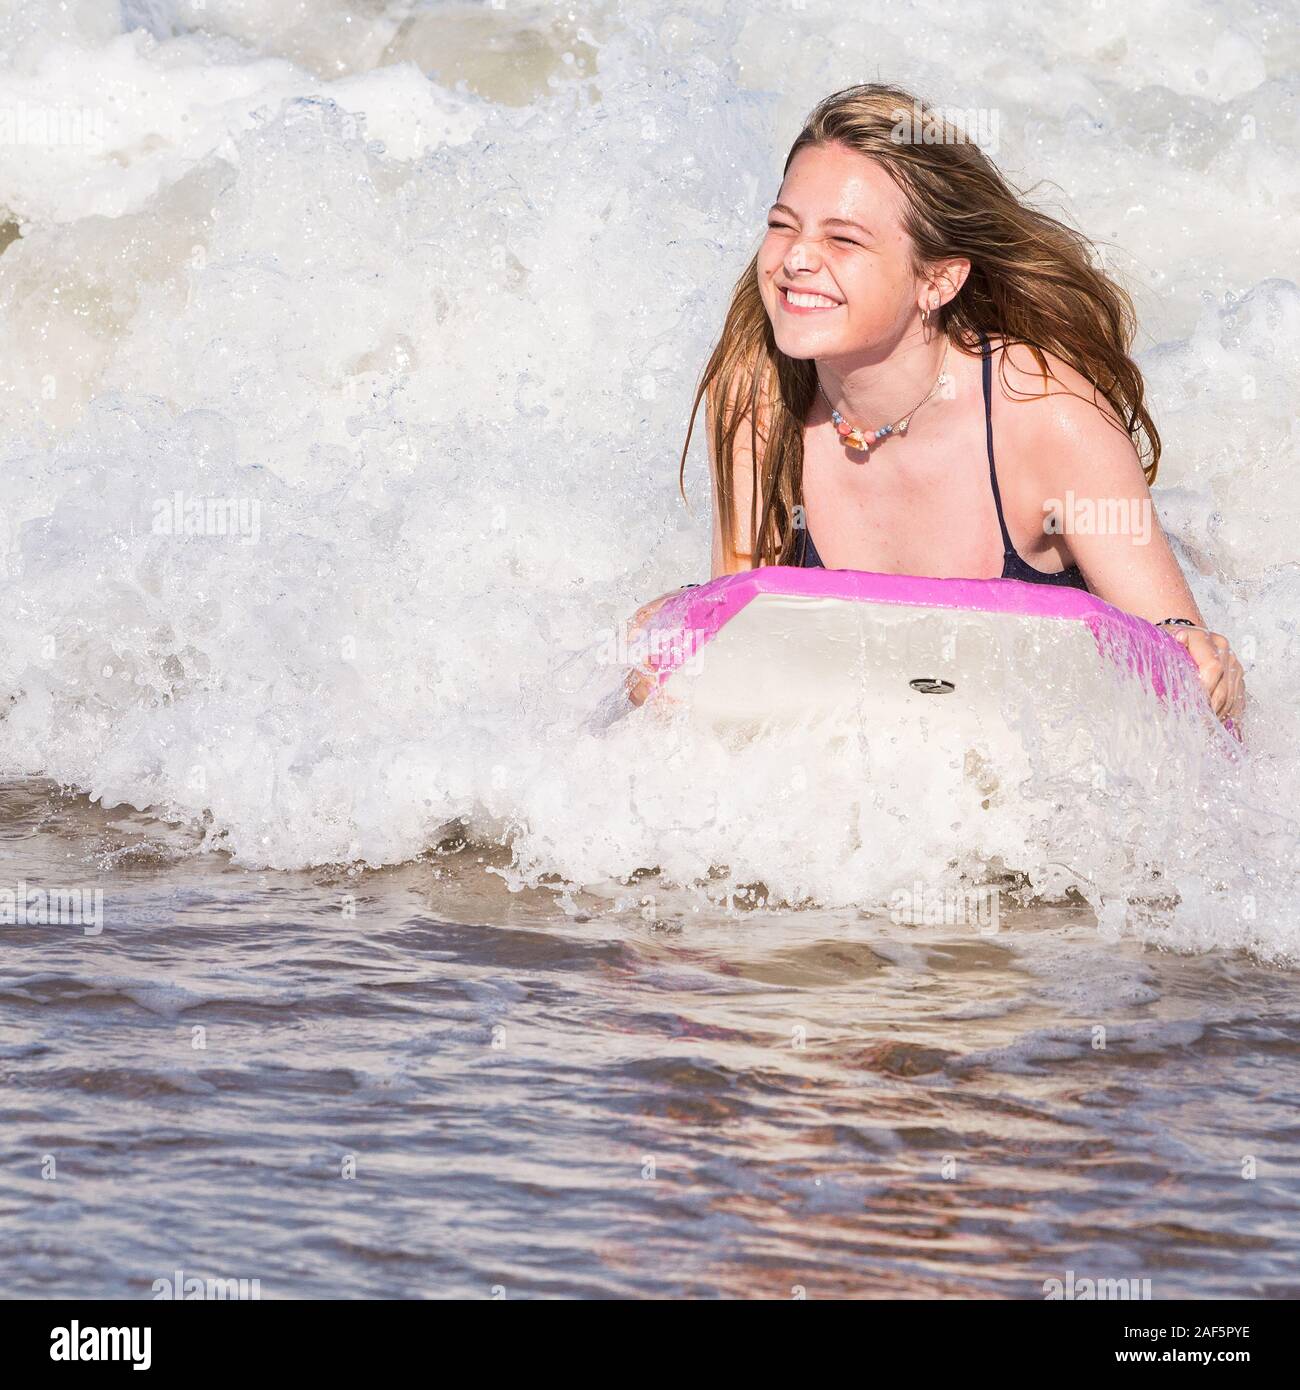 Avon, Outer Banks, North Carolina.  Teenage Girl Boogie Boarding. (Model Released) Stock Photo